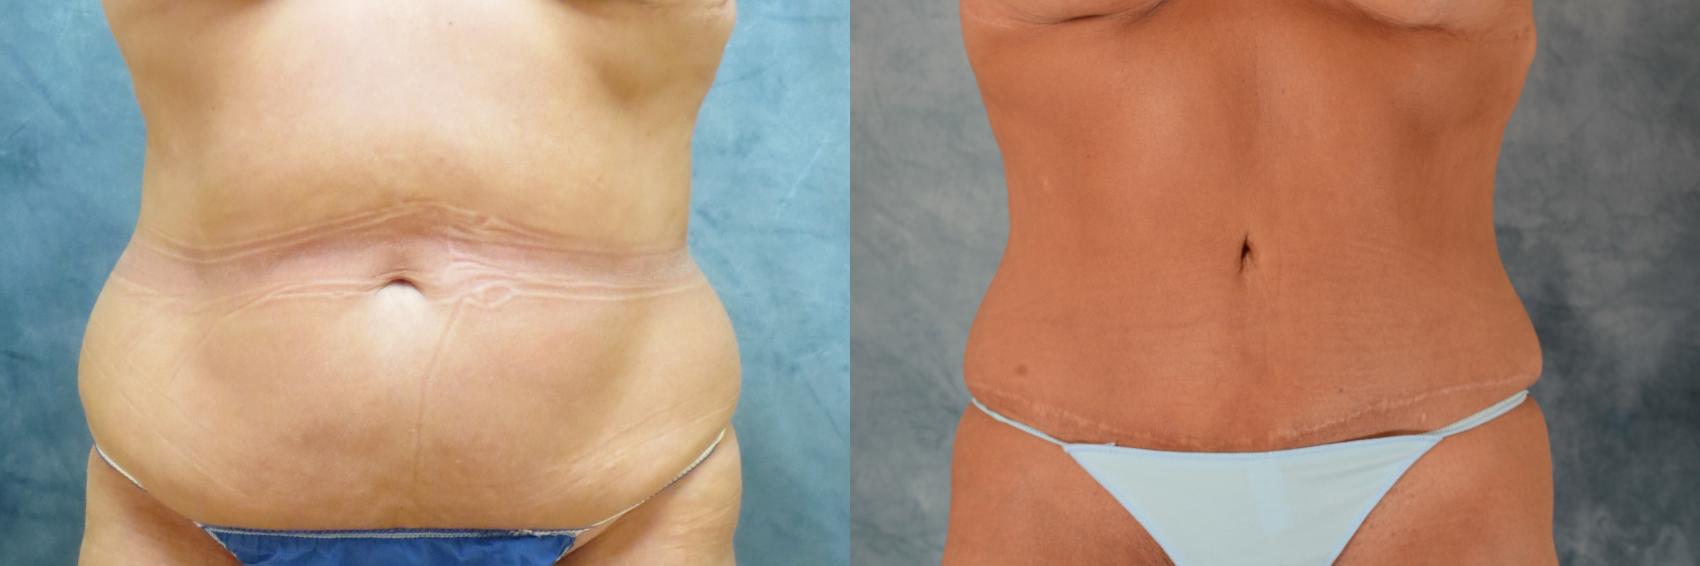 Before & After Tummy Tuck (Abdominoplasty) Case 534 Front View in Tallahassee, FL